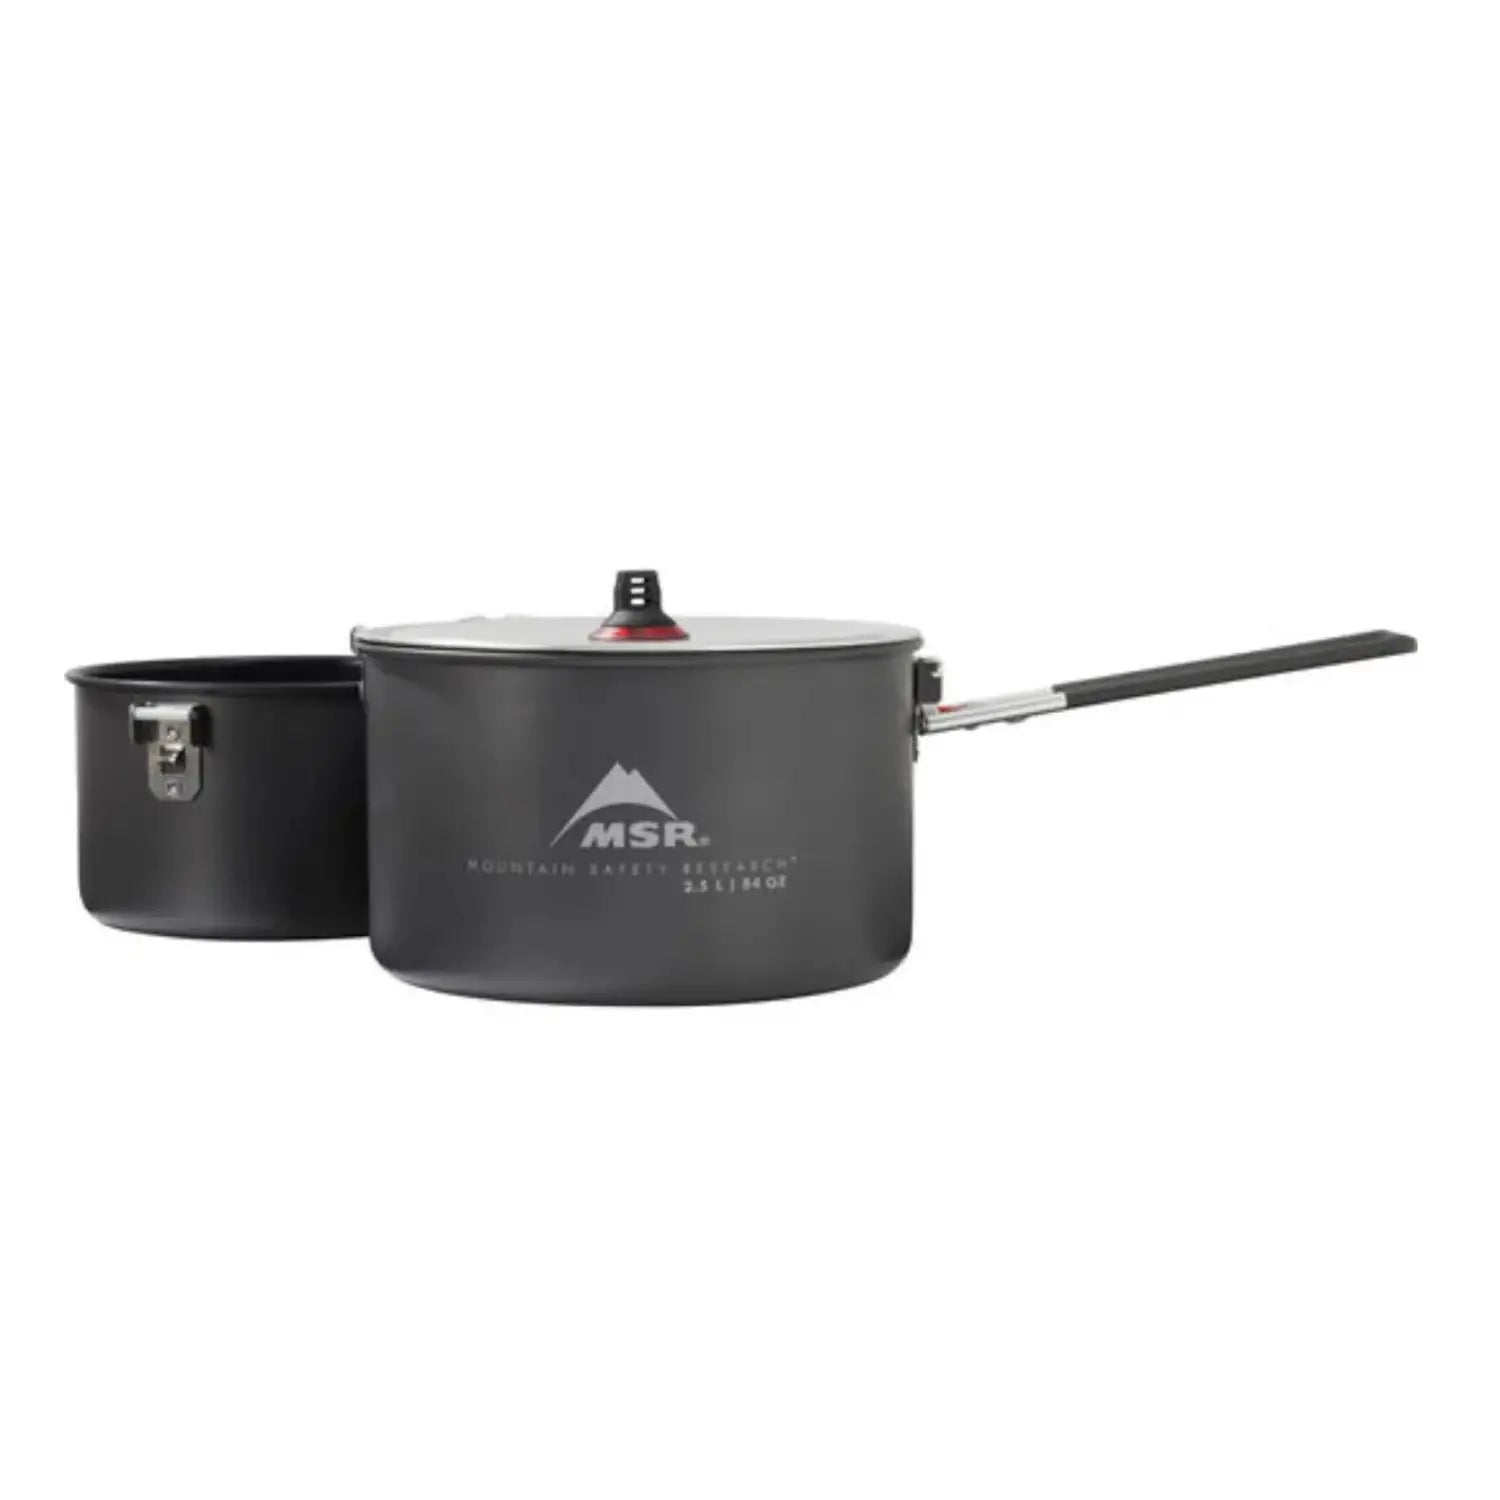 MSR Ceramic 2-Pot Set shown with handle  on the larger pot and smaller pot to the left.